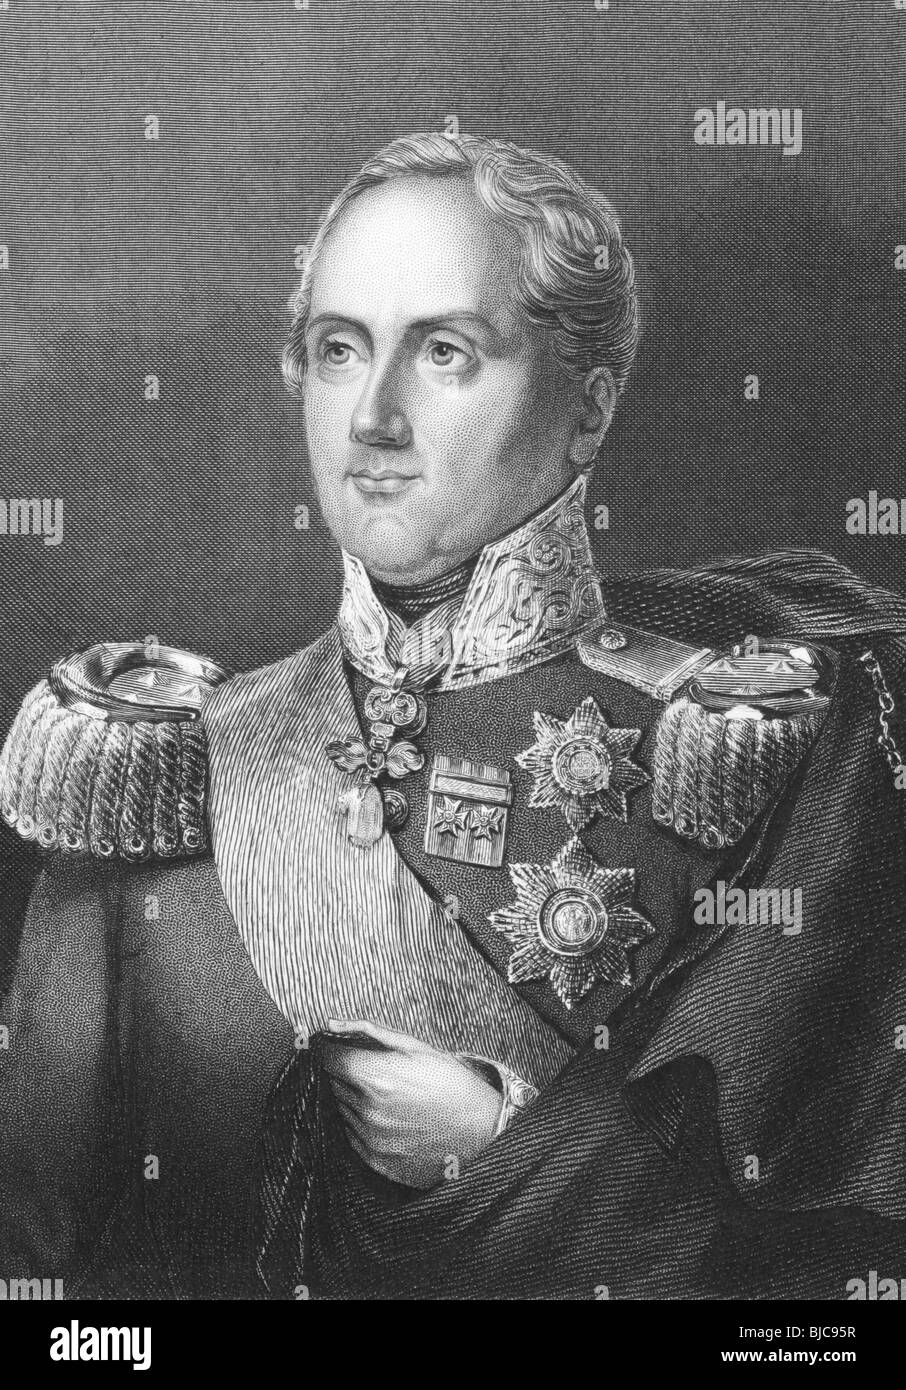 Frederick Augustus I of Saxony (1750-1827) on engraving from the 1800s. King of Saxony duting 1805-1827. Stock Photo